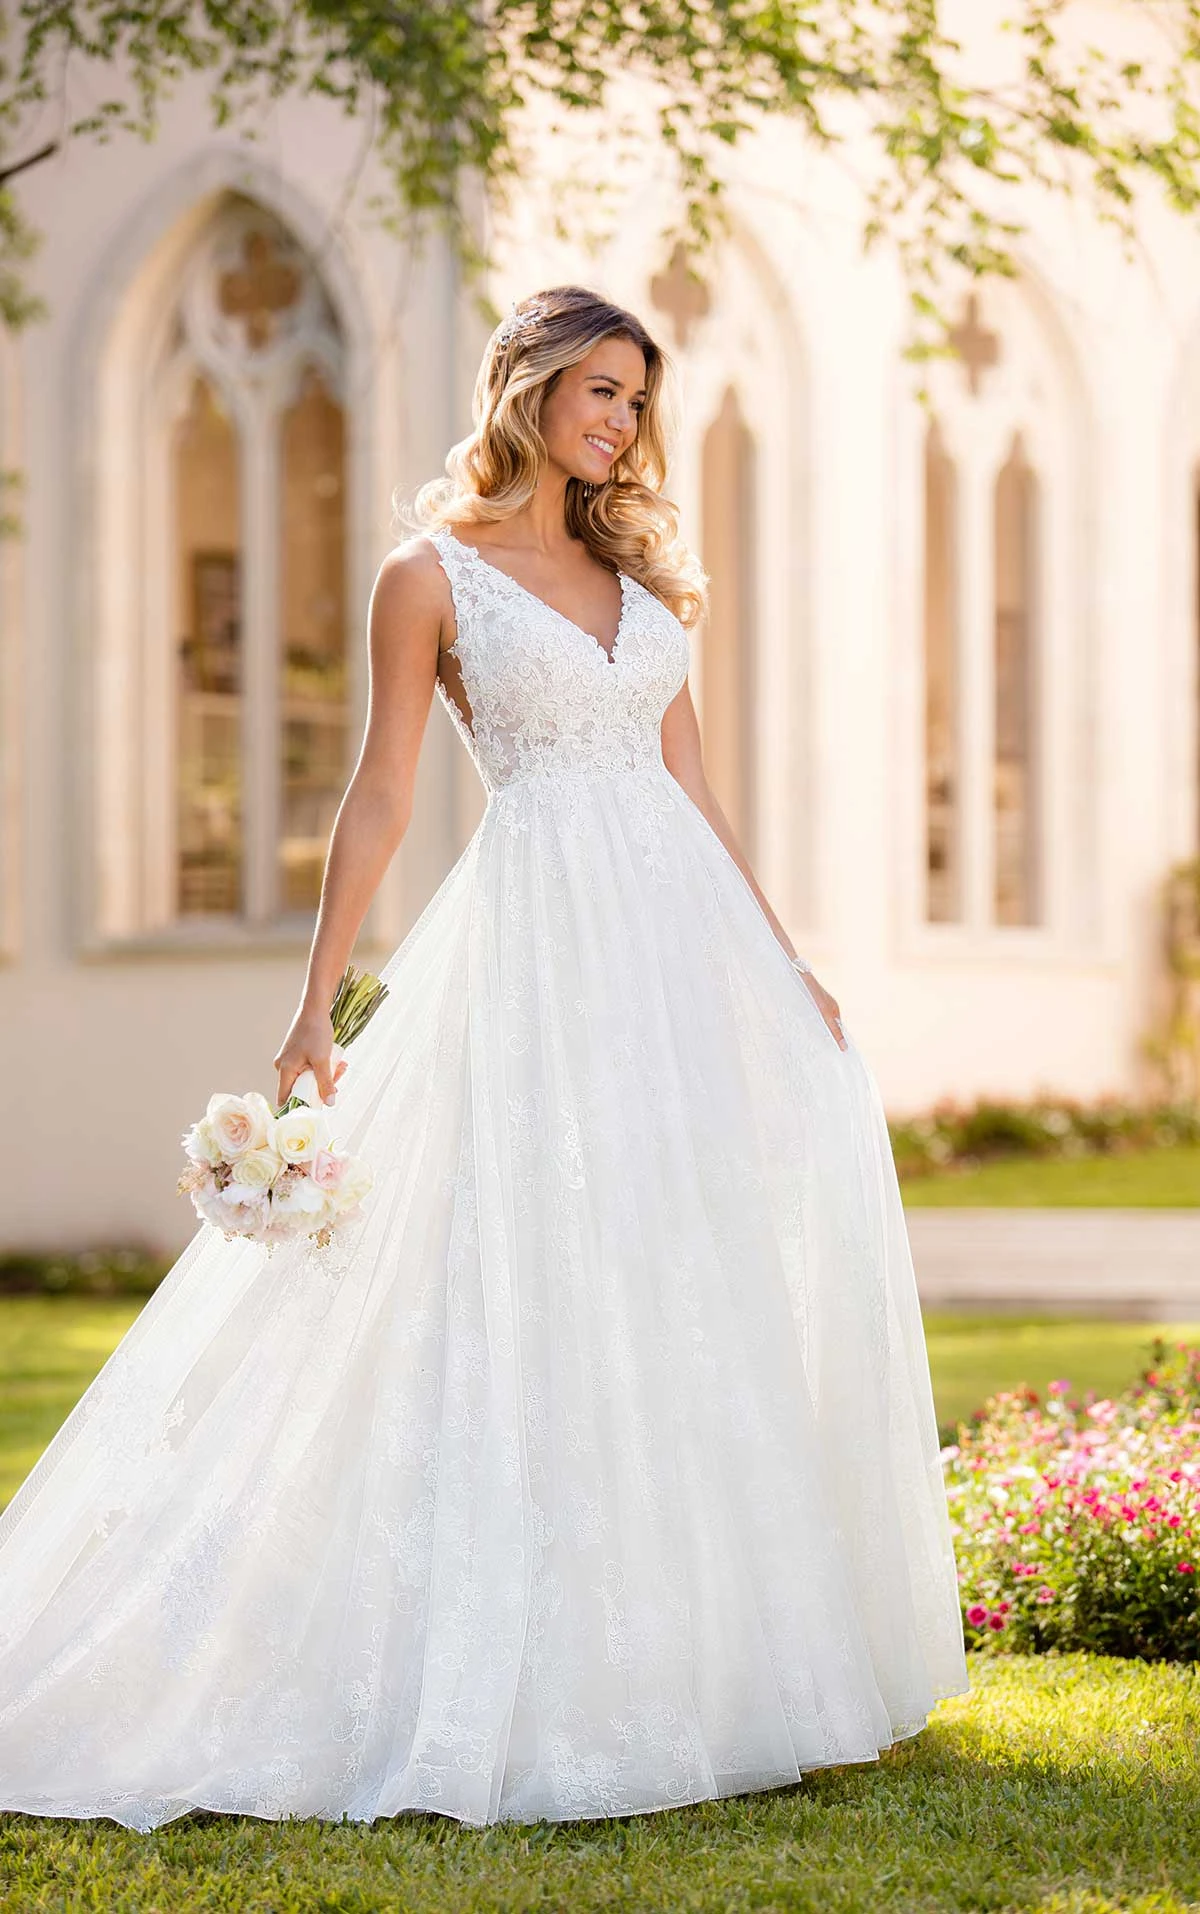 white wedding dress with lace